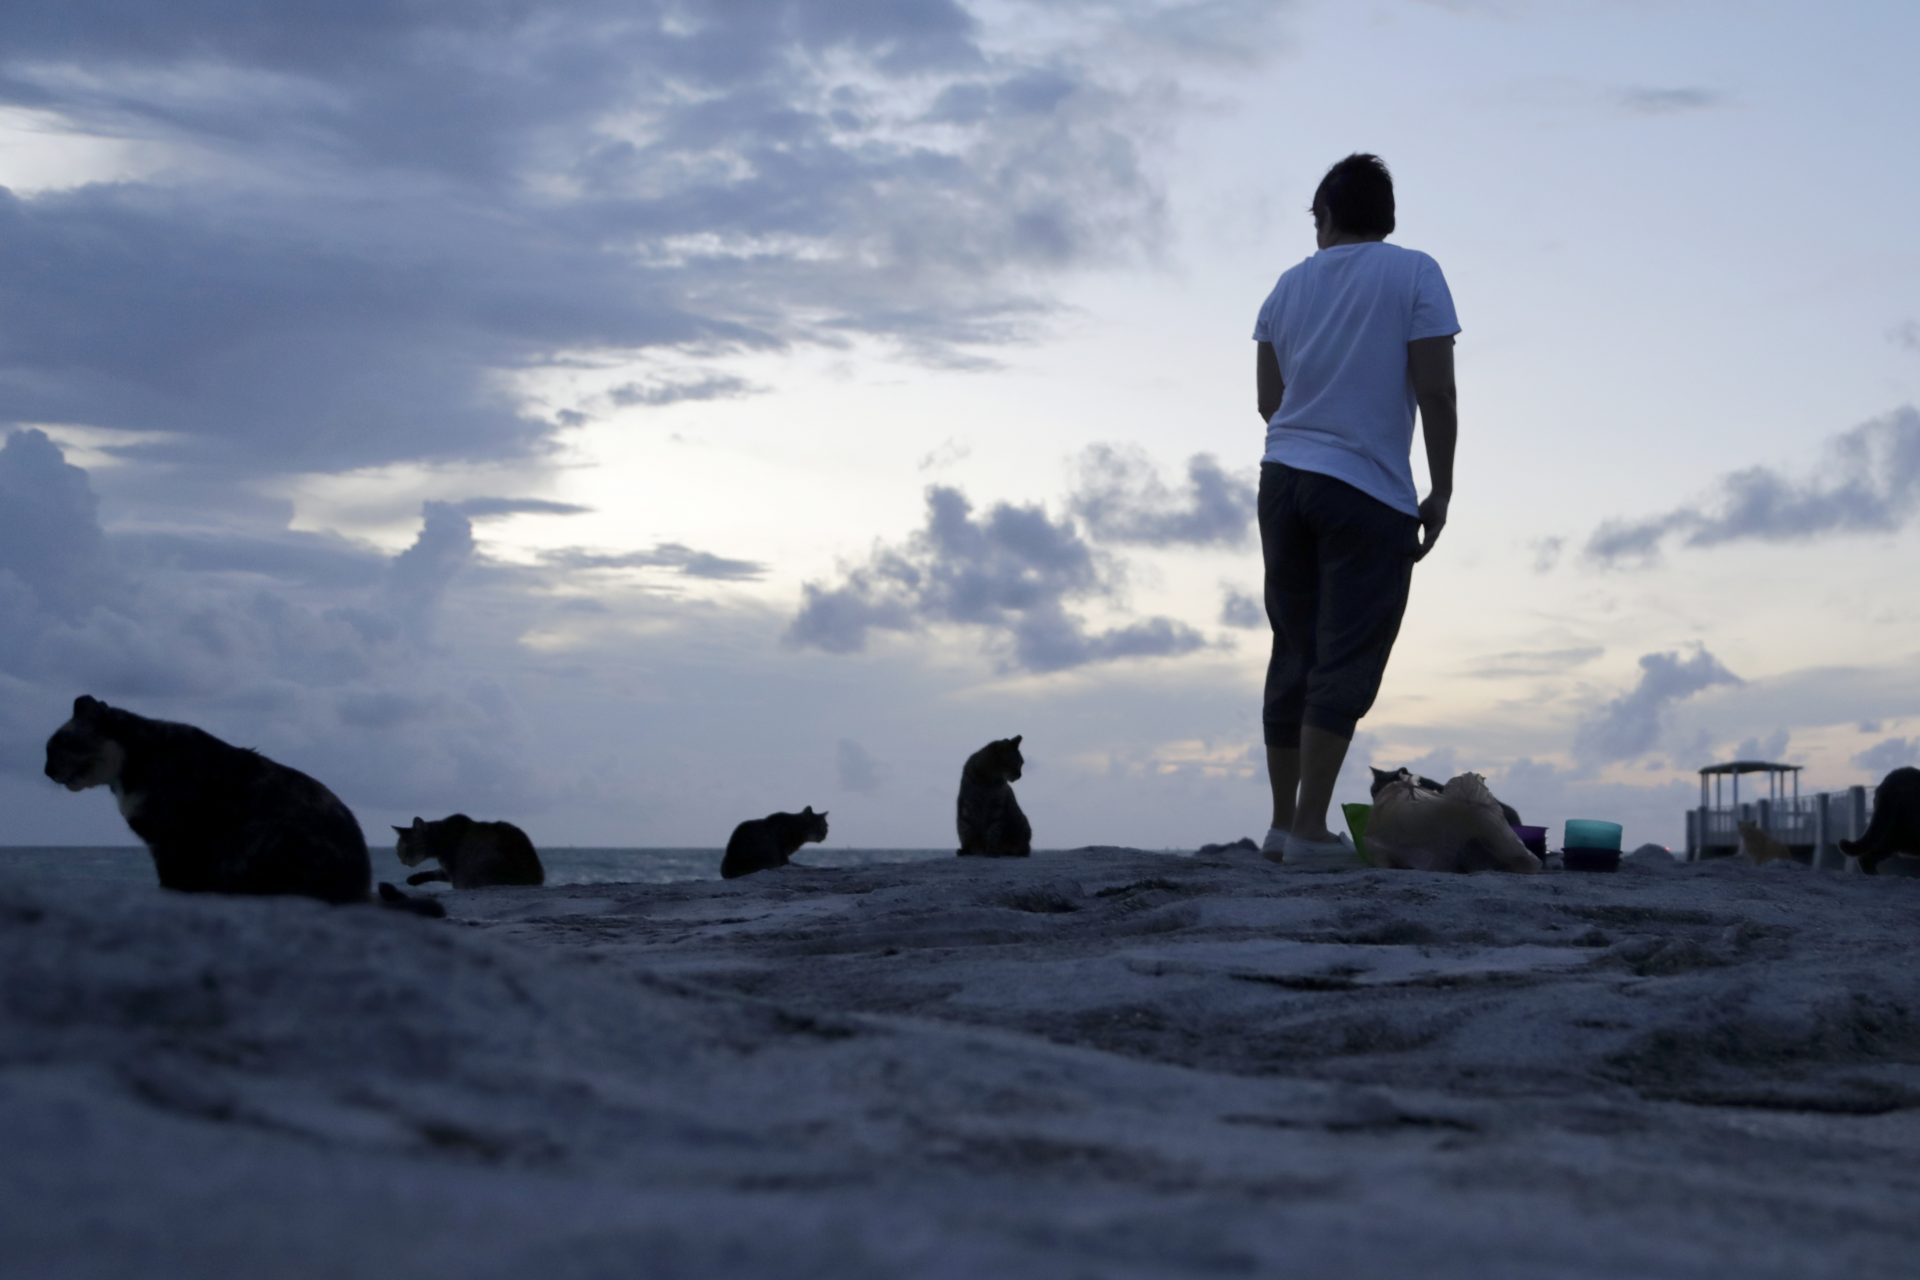 A woman who gave her name as Cindy feeds stray cats at South Pointe Park, Saturday, Aug. 31, 2019, in Miami Beach, Fla. Forecasters say Hurricane Dorian will threaten the Florida peninsula late Monday or early Tuesday. (AP Photo/Lynne Sladky)